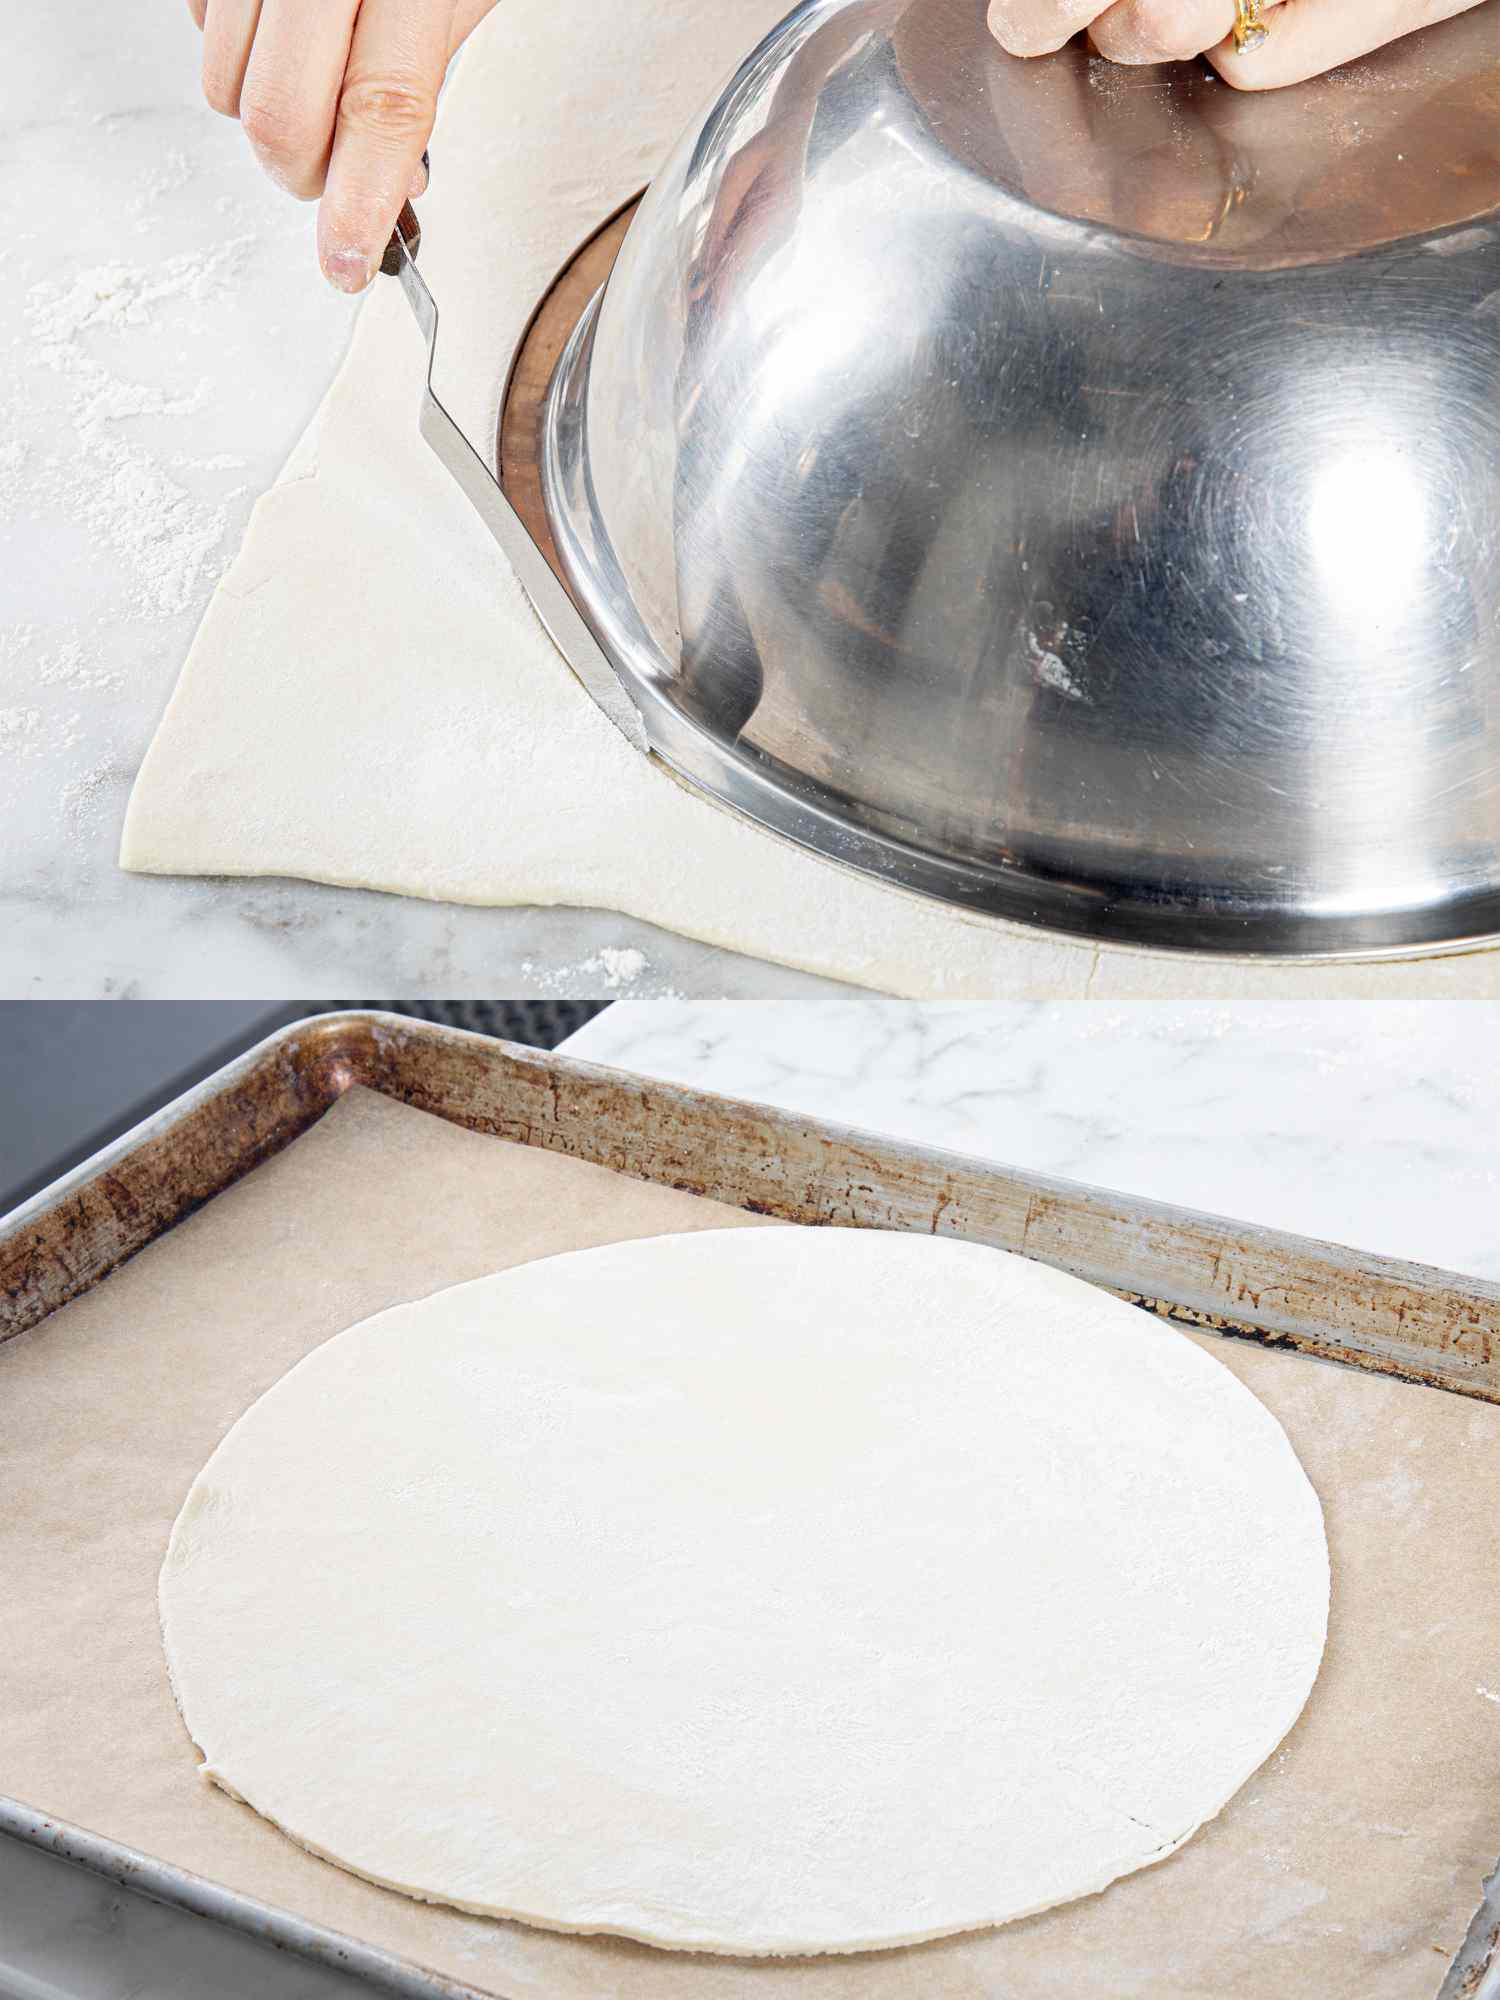 Two image collage of using a mixing bowl to cut a circle in dough and then circle of dough resting on a baking sheet